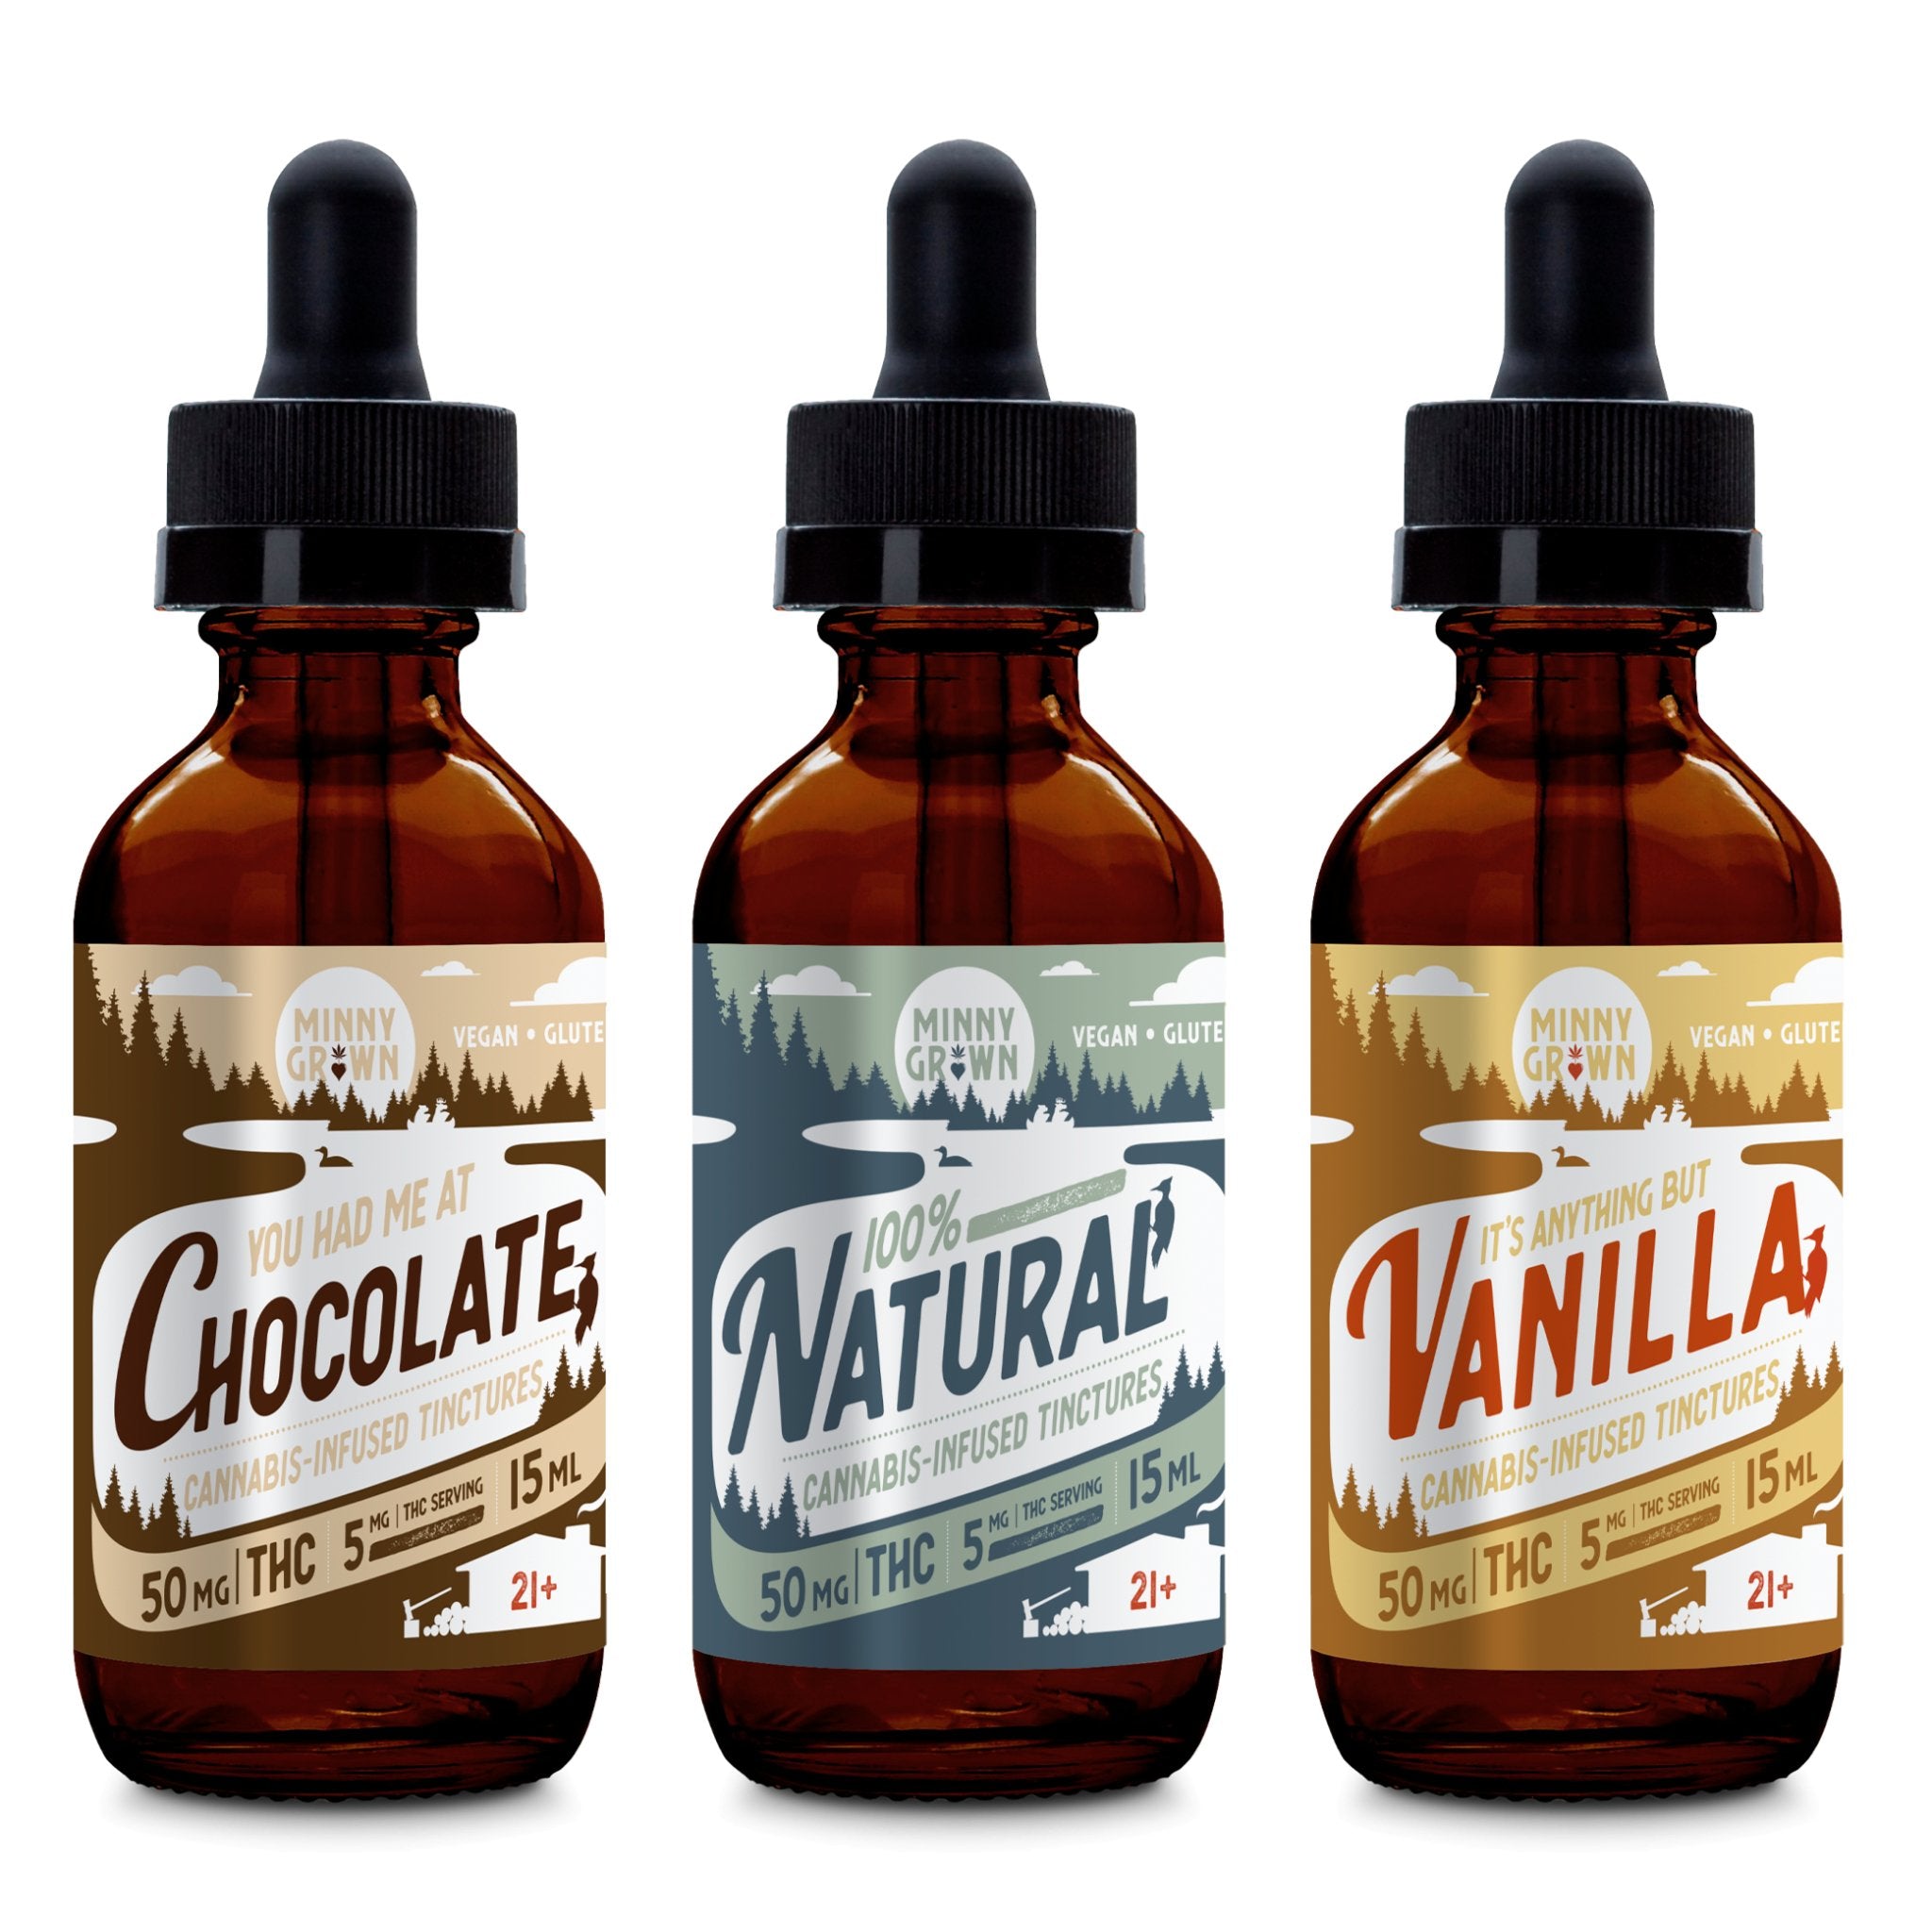 MINNY GROWN Tinctures 50mg THC (3 Flavors)